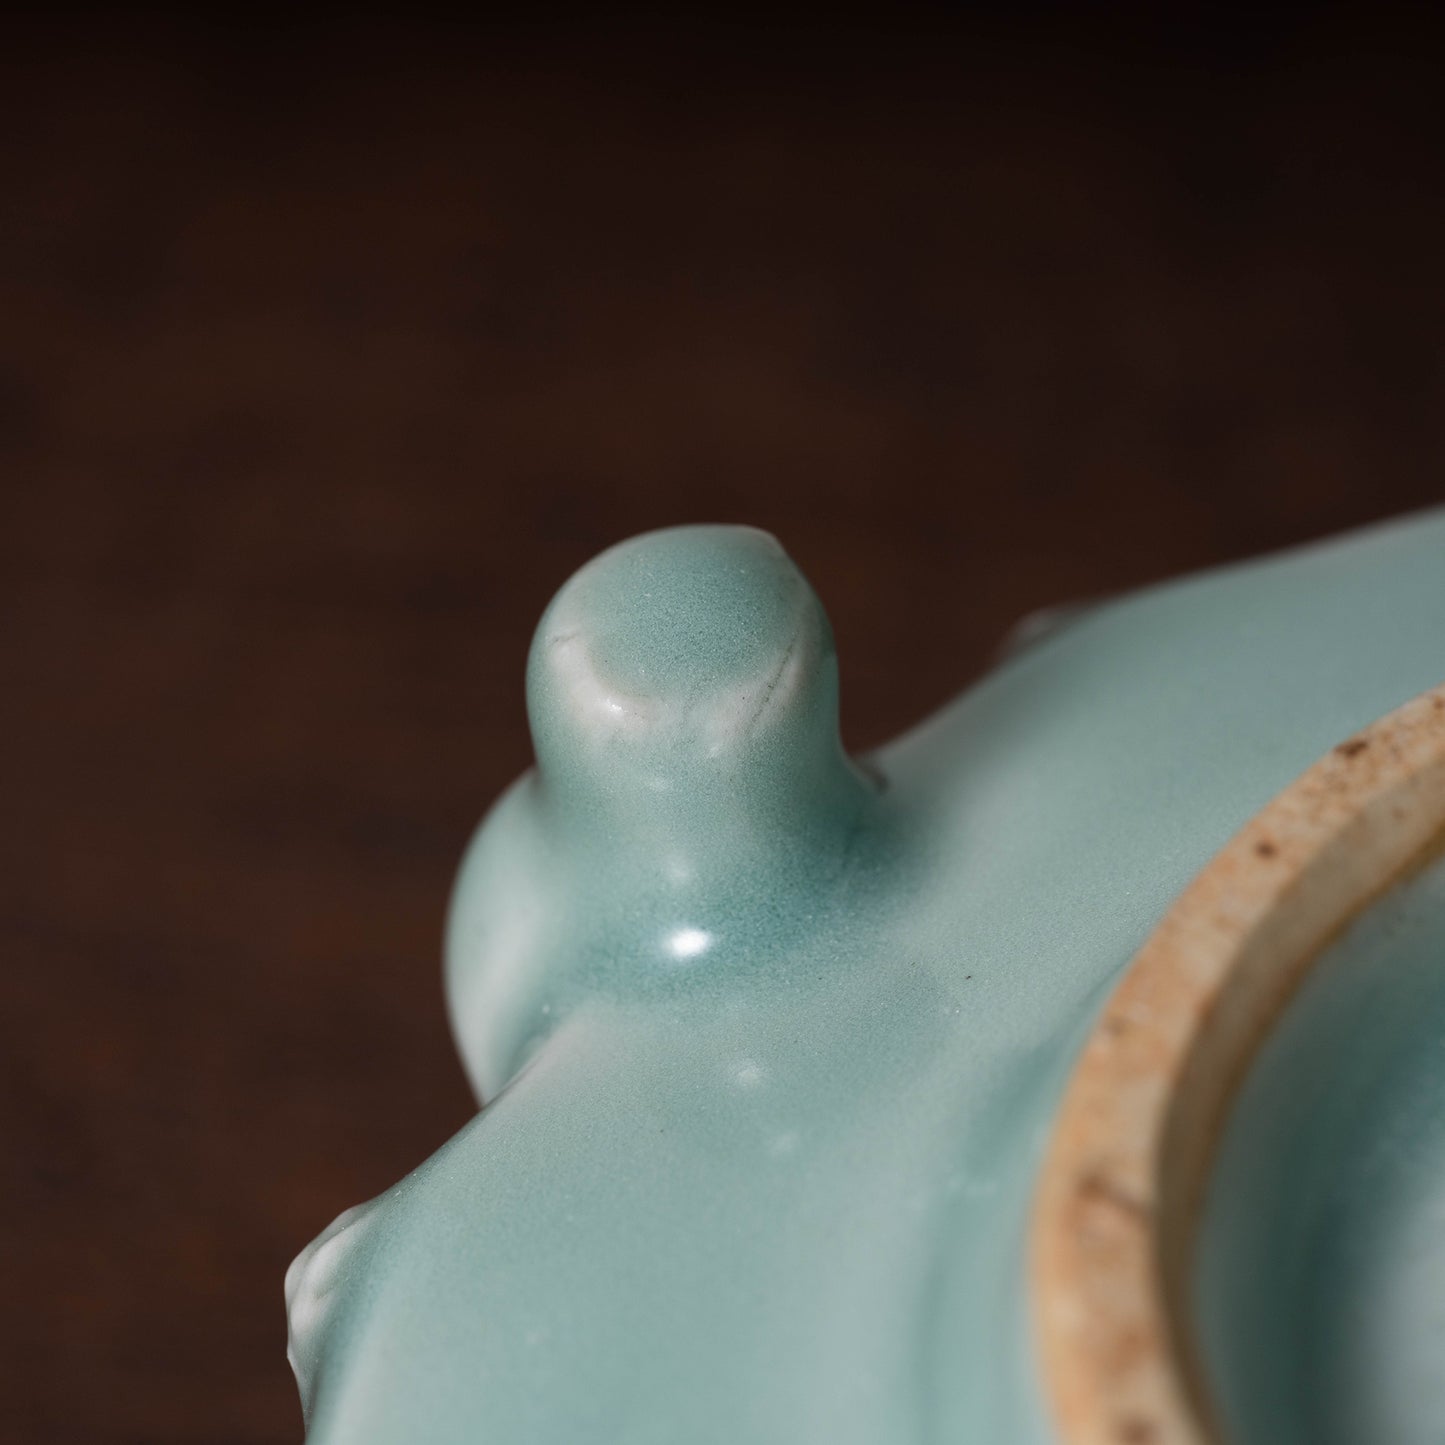 Longquan Celadon Basin with Three Legs and Studs Design